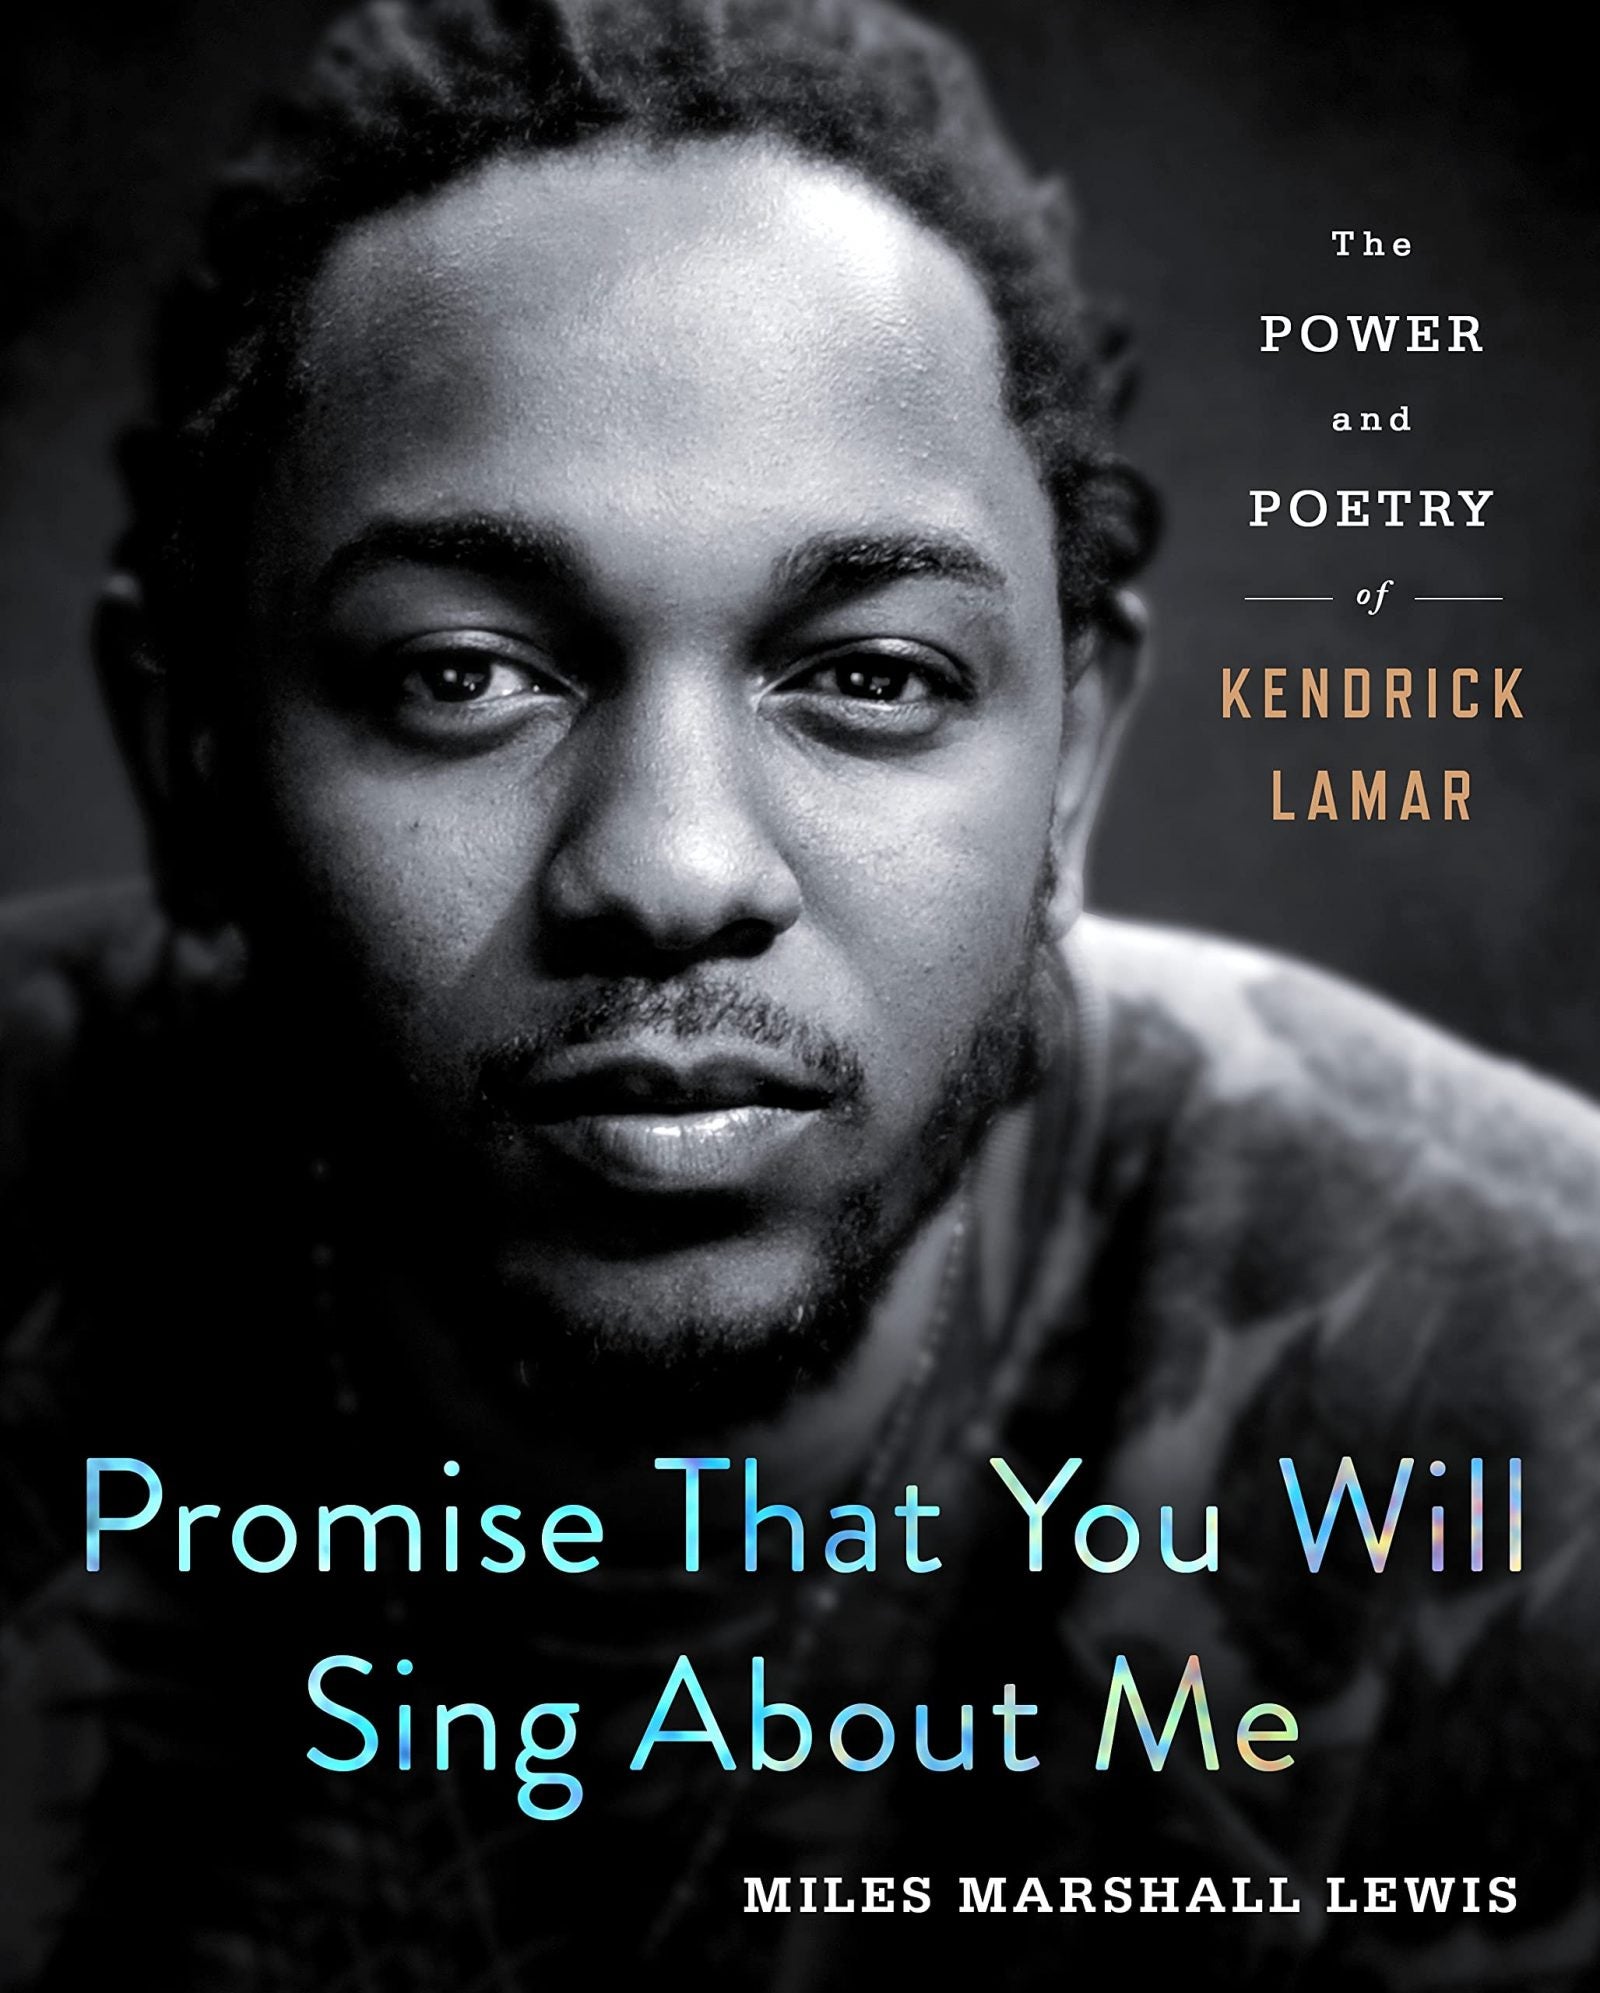 10 Upcoming Music Memoirs We’re Excited About